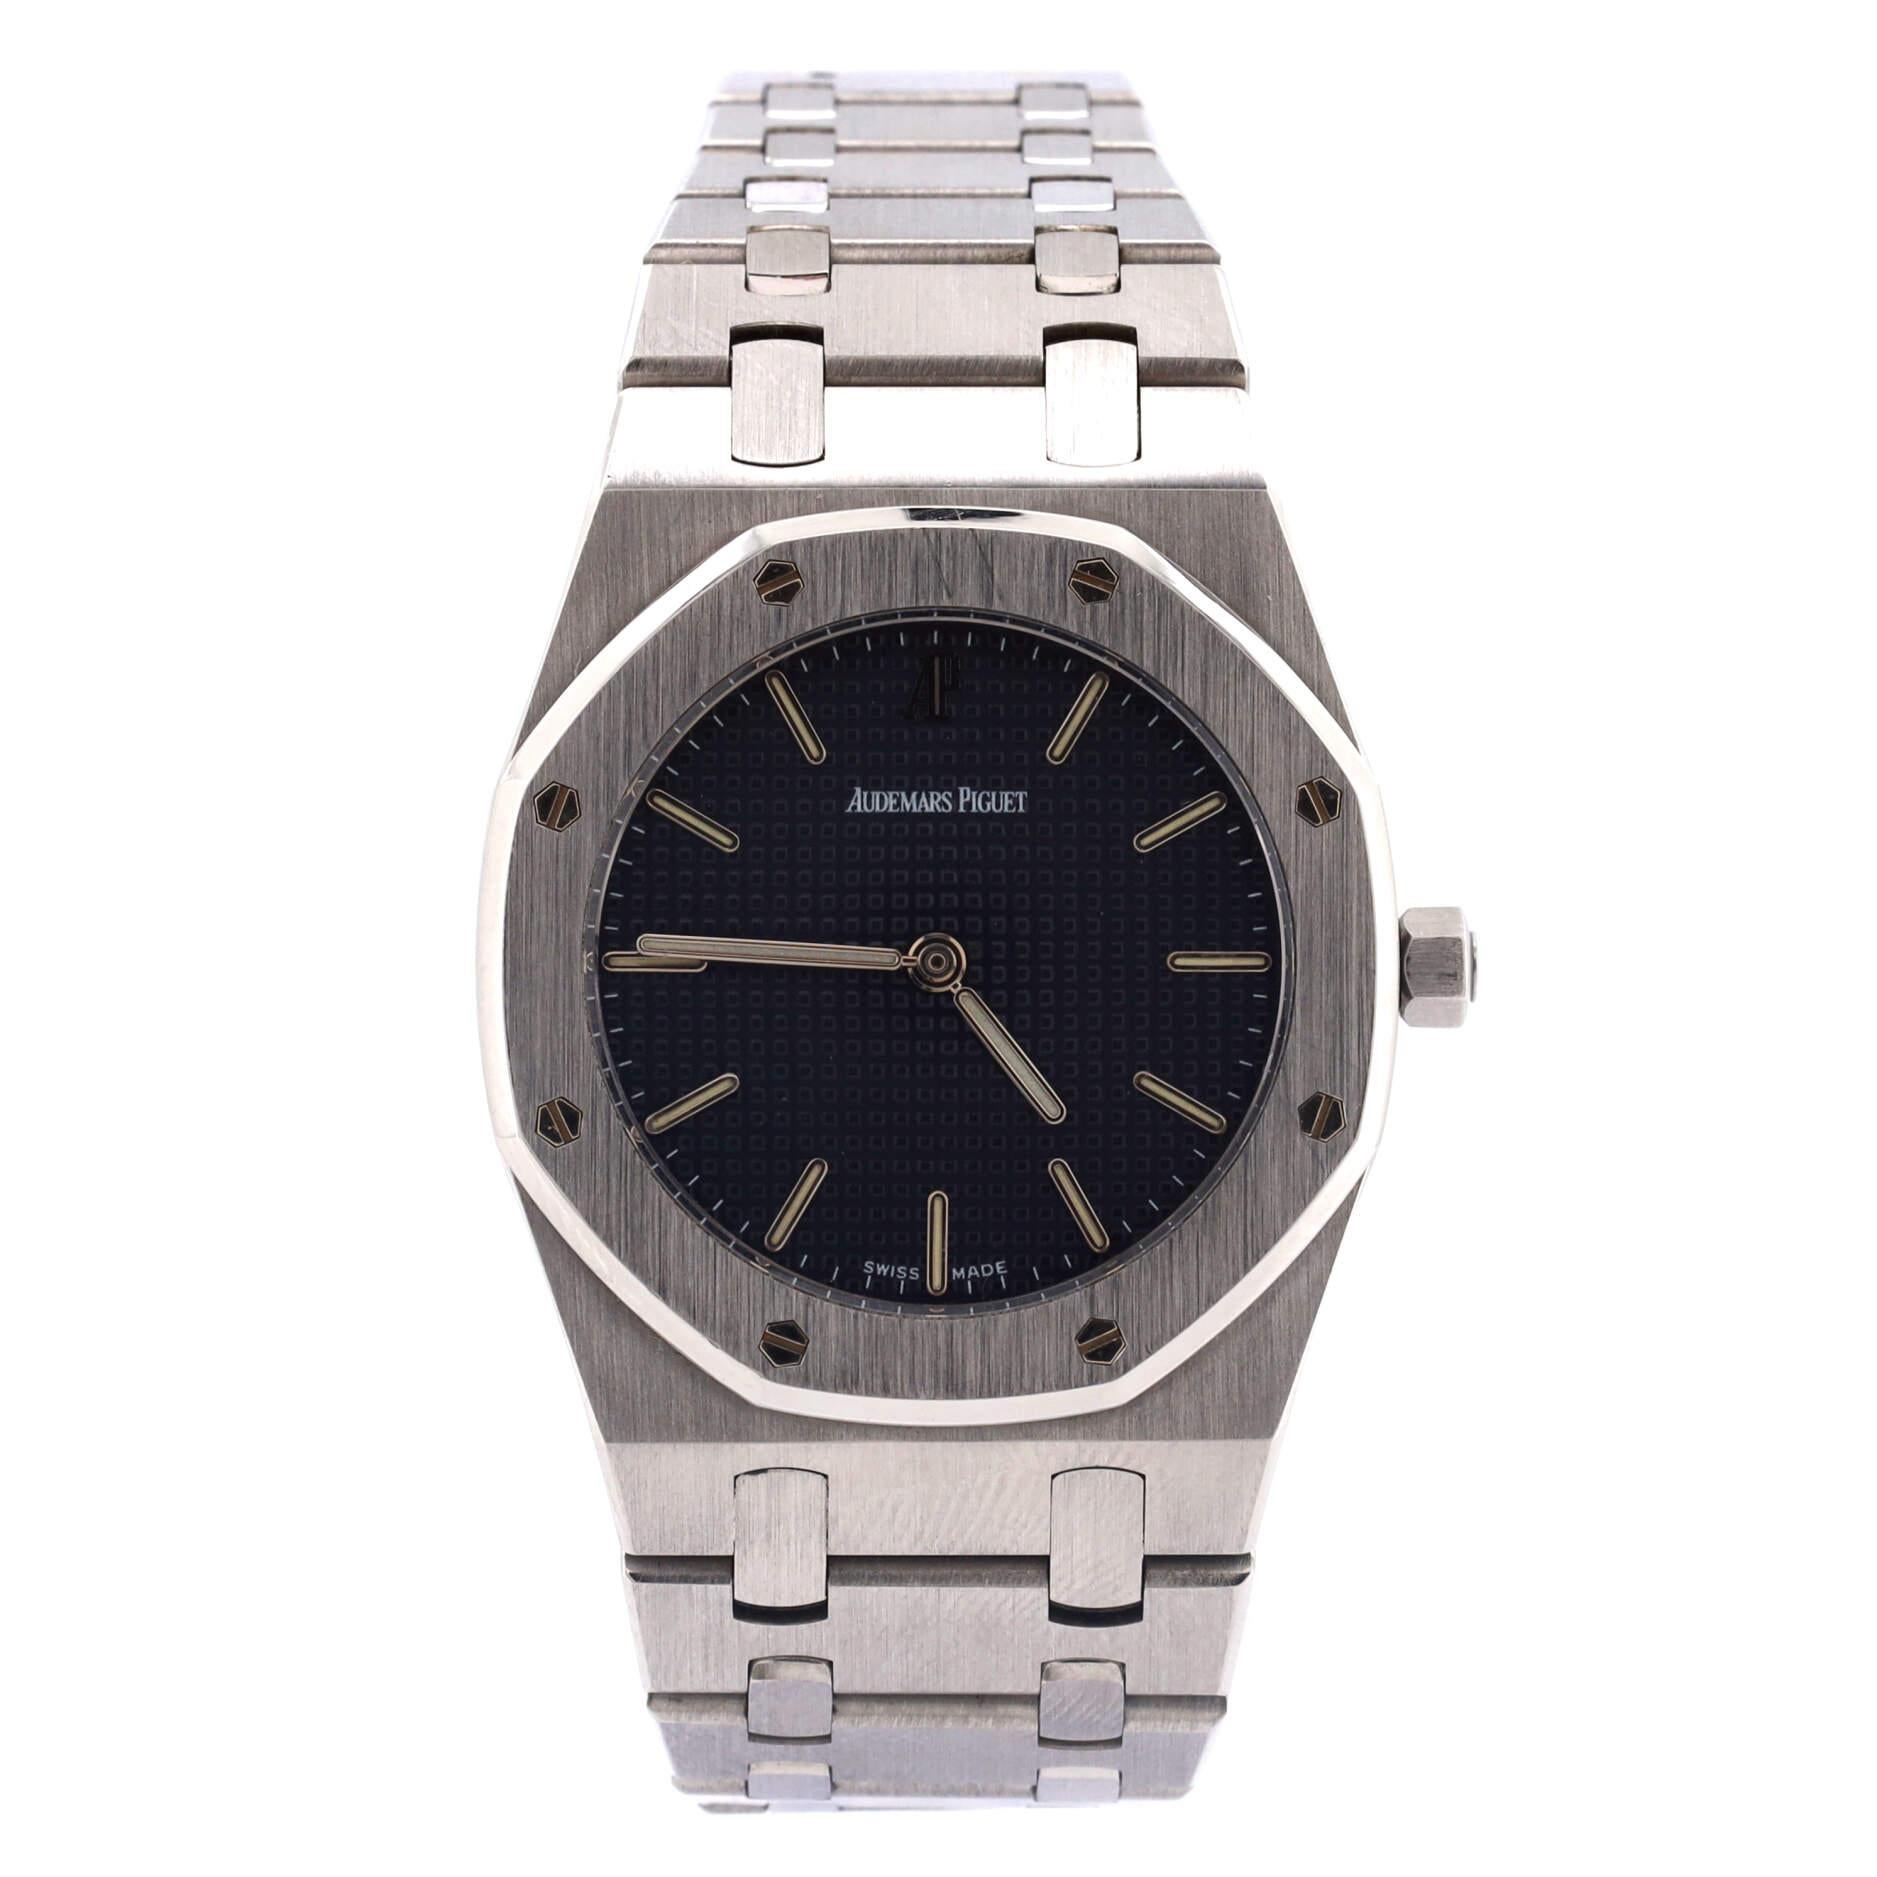 Condition: Great. Minor wear throughout case and bracelet.
Accessories: No Accessories
Measurements: Case Size/Width: 33mm, Watch Height: 6mm, Band Width: 23mm, Wrist circumference: 6.25